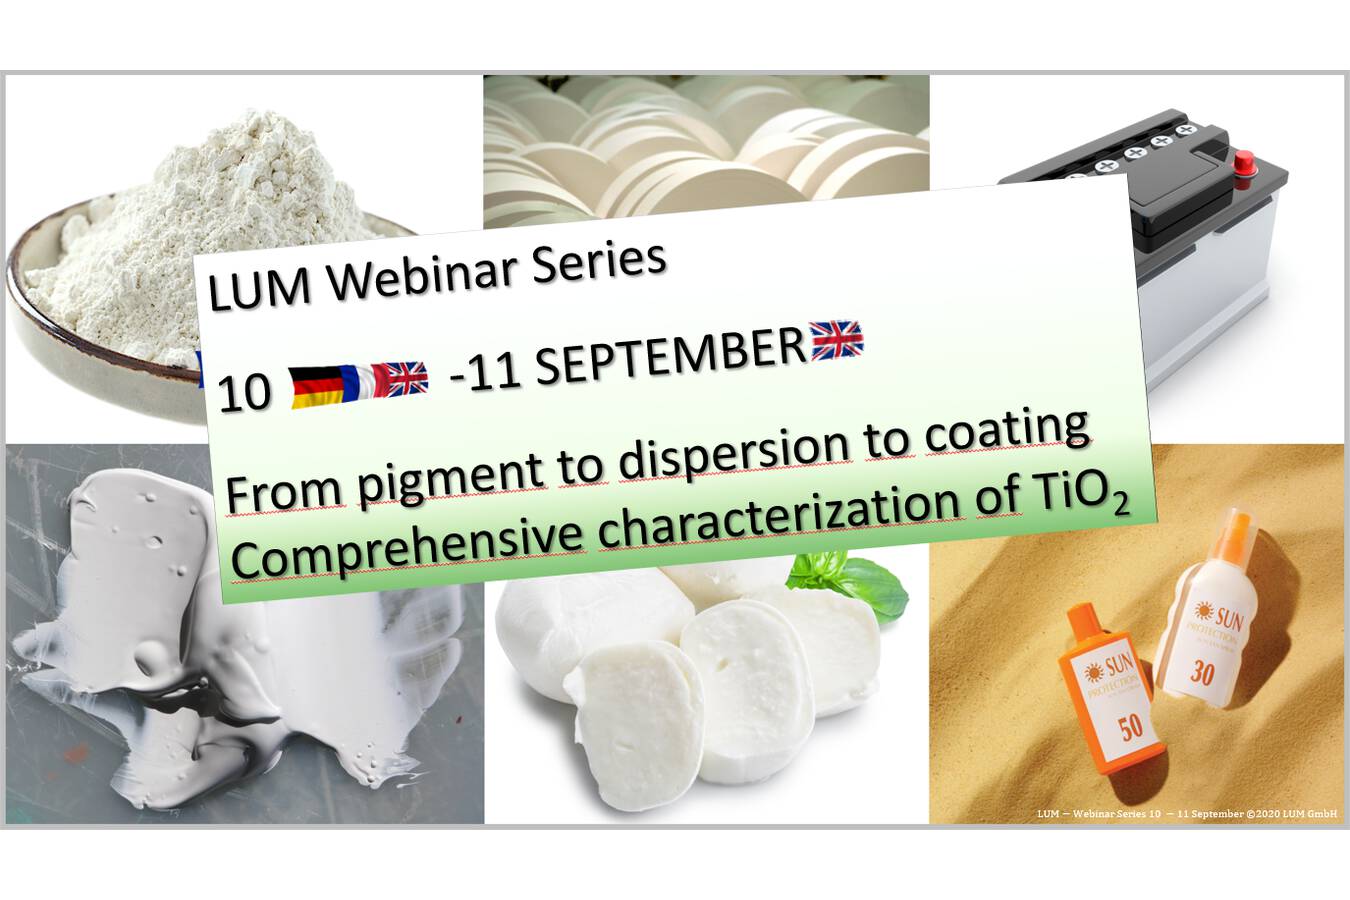 Comprehensive characterization of Titanium dioxide- Webinars 10 & 11 Sep From pigment to dispersion to coating